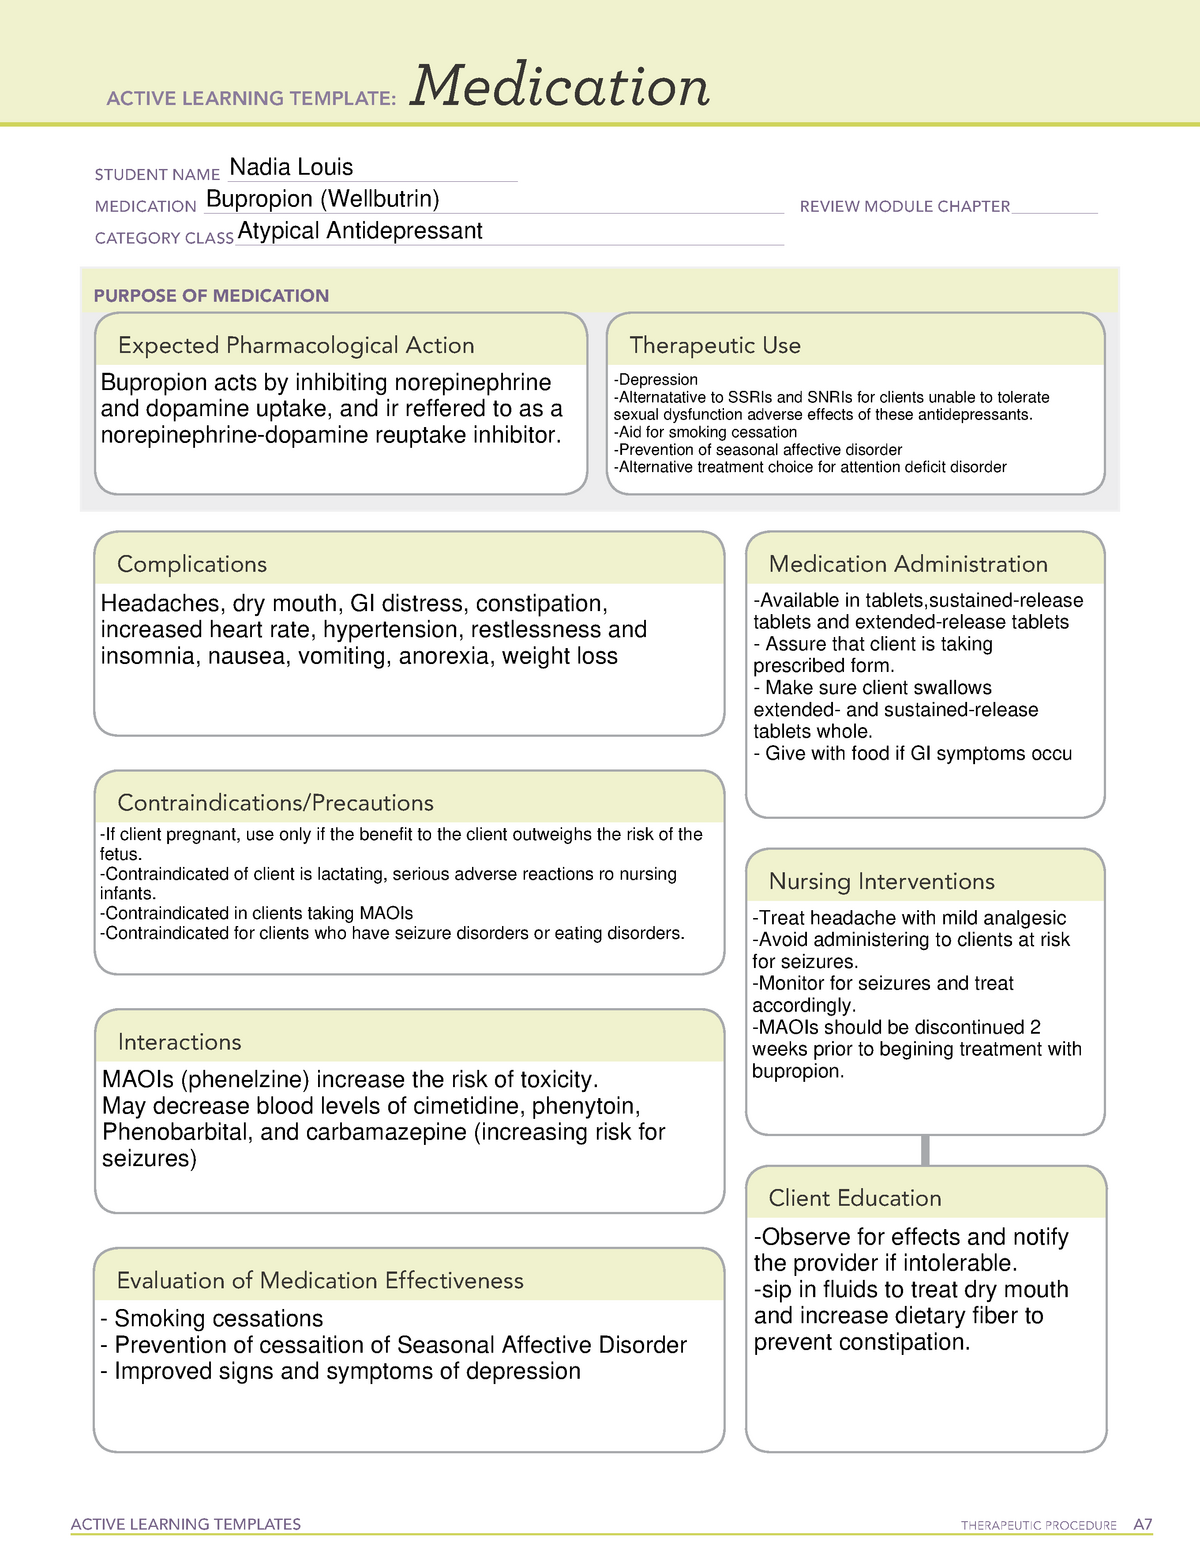 bupropion-using-the-ati-active-learning-medication-template-and-ati-text-pn-pharm-complete